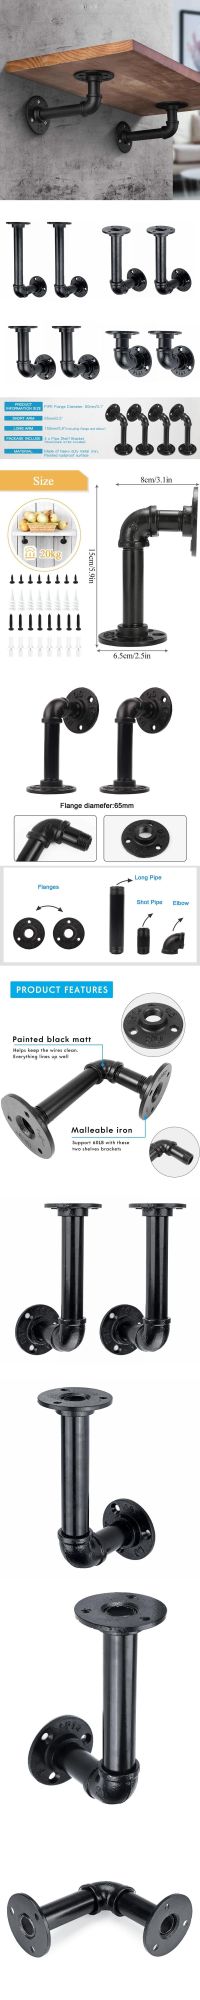 Black 3/4" Pipe Fitting Bracket with Wooden Shelves